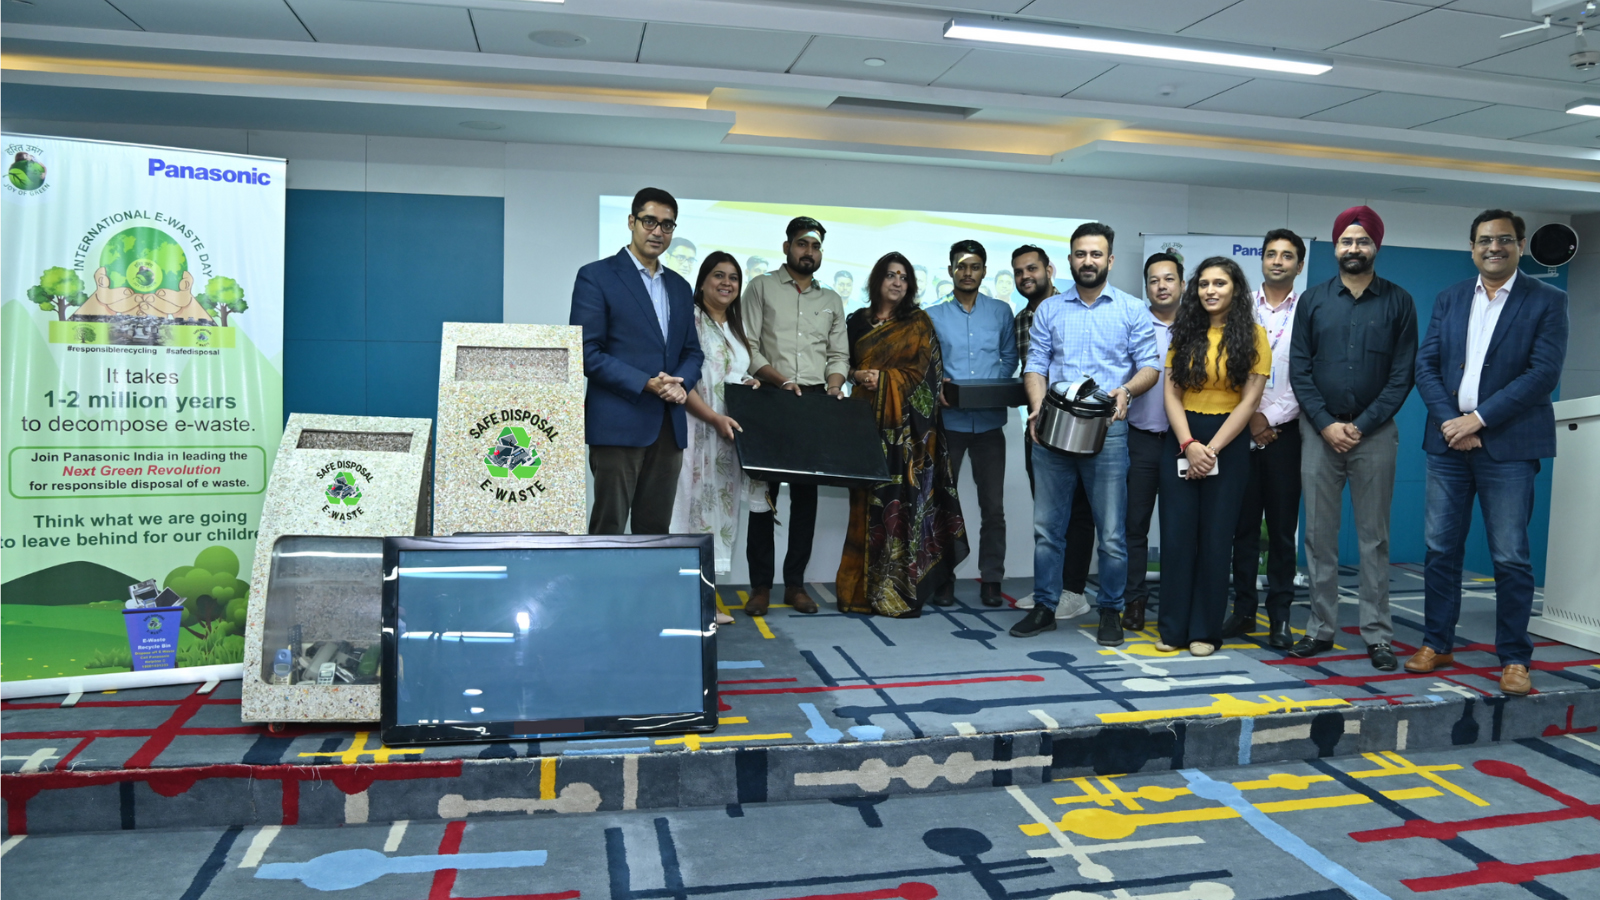 Photo: Launch of an e-waste collection drive for employees on International E waste Day by Manish Sharma, Chairman, Panasonic Life Solutions India and Ritu Ghosh, Head - Corporate Affairs & CSR, Panasonic Life Solutions India. 